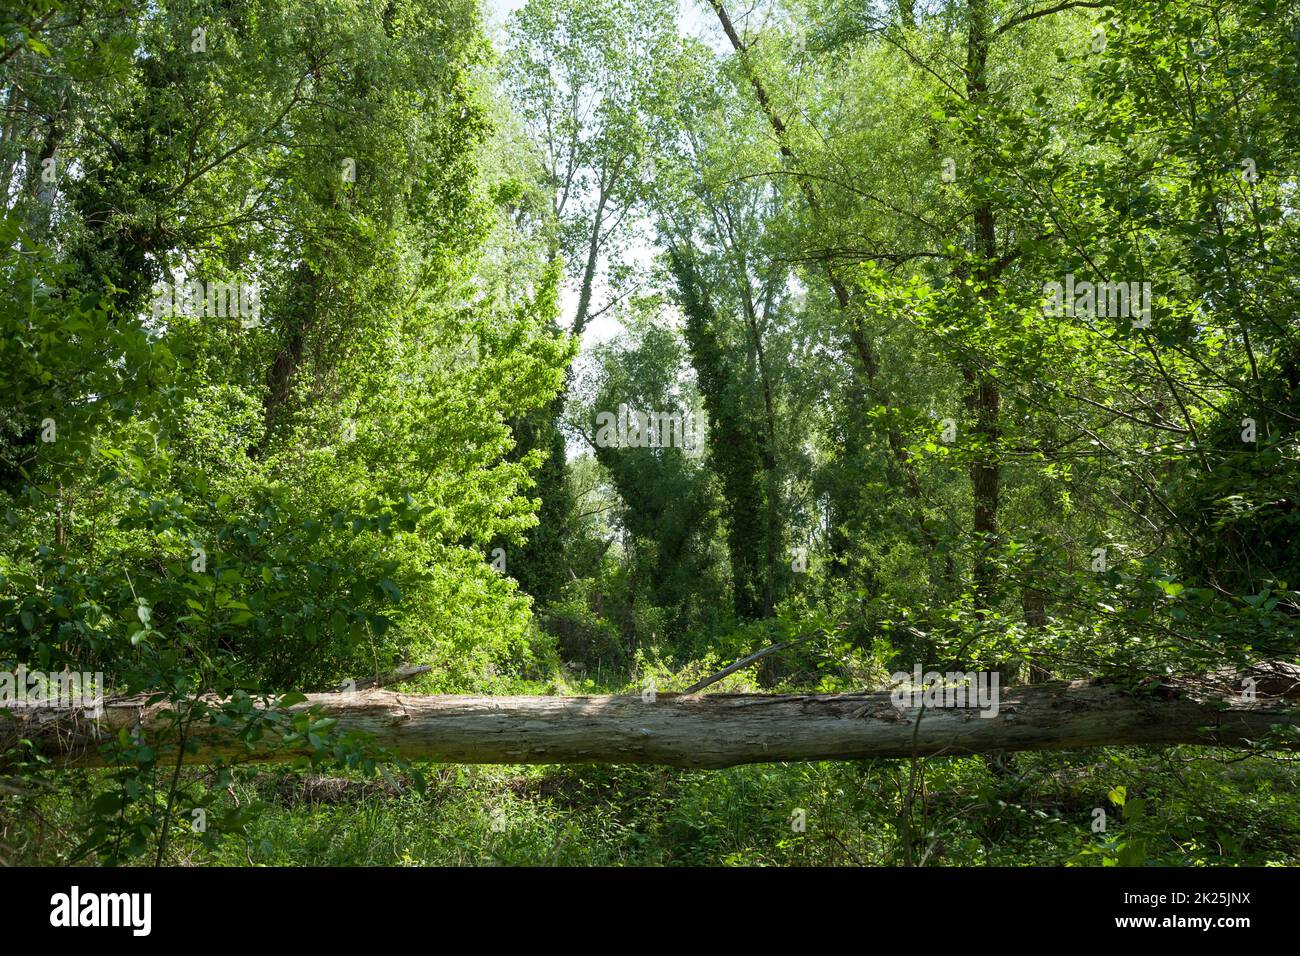 A beautiful shot of a forest reflective river under the sunlight Stock Photo